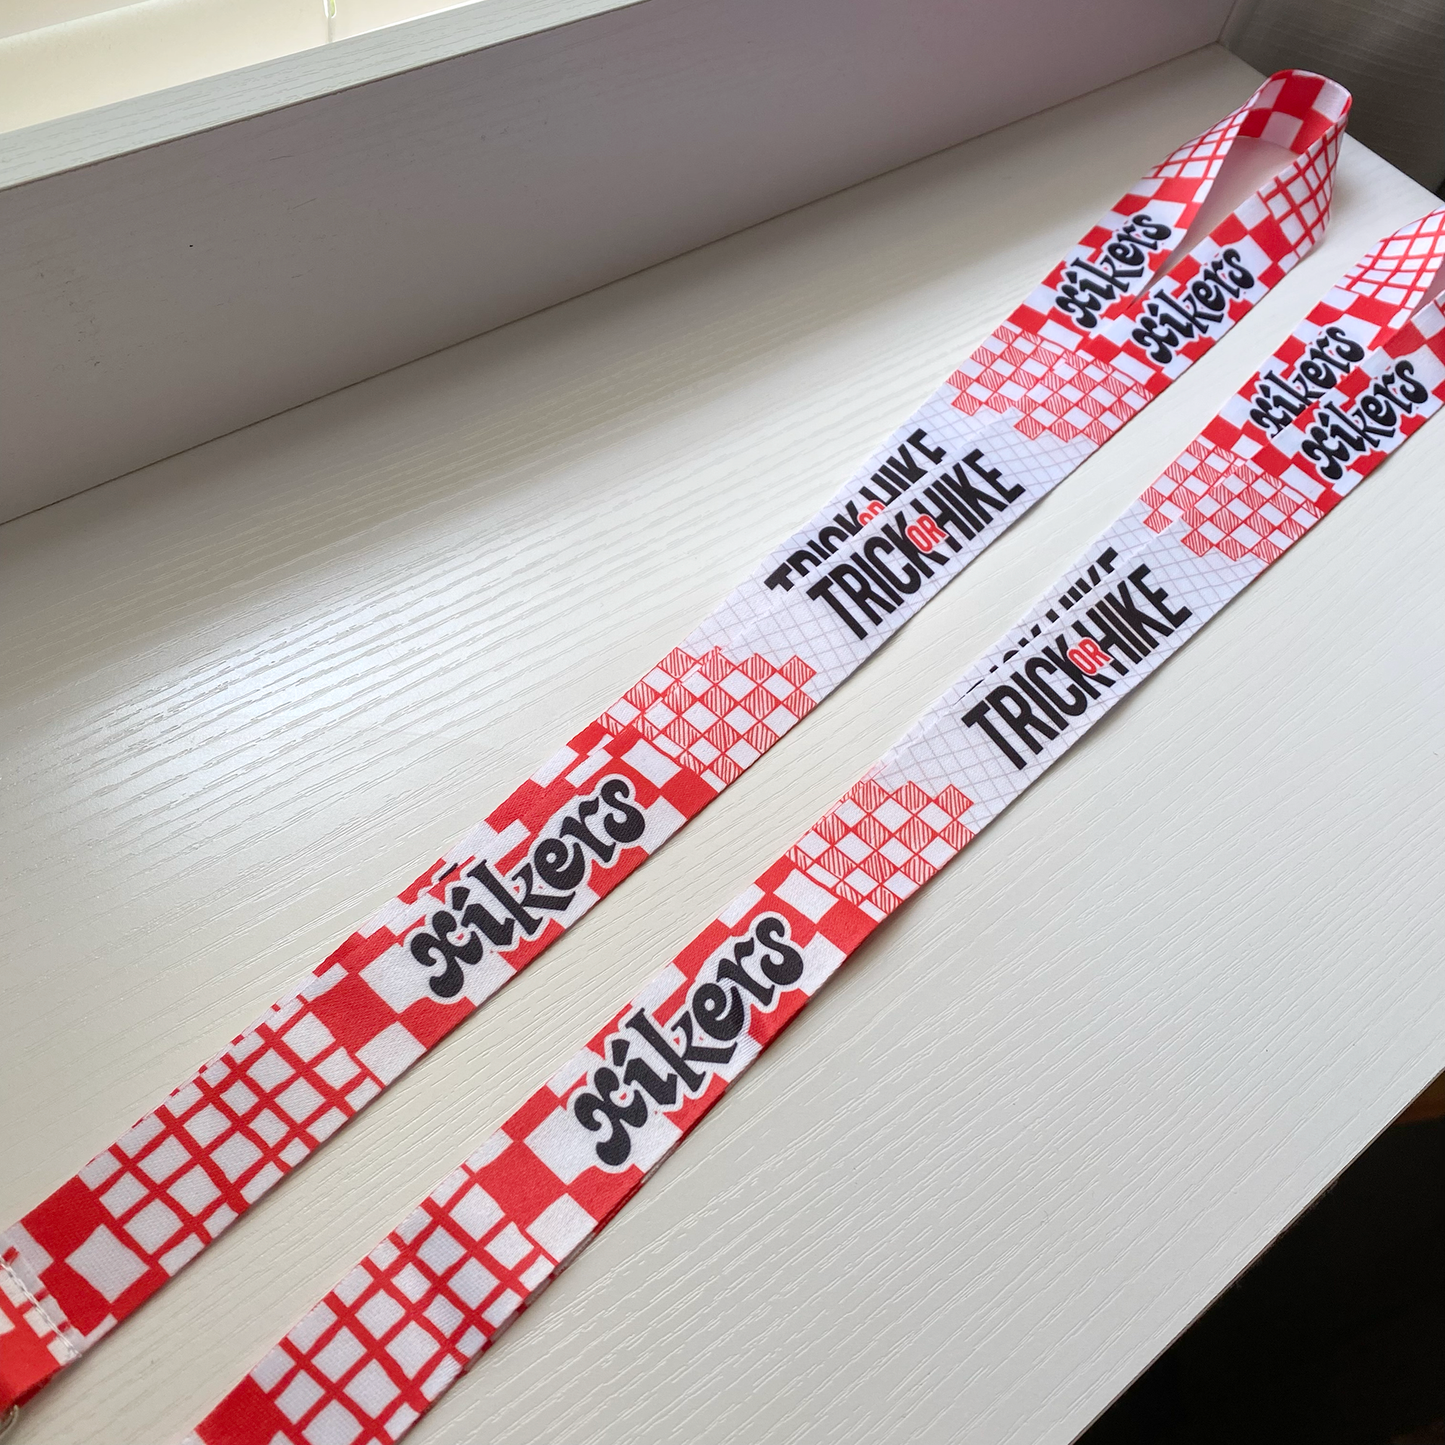 XIKERS "House of Tricky" Inspired Lanyard